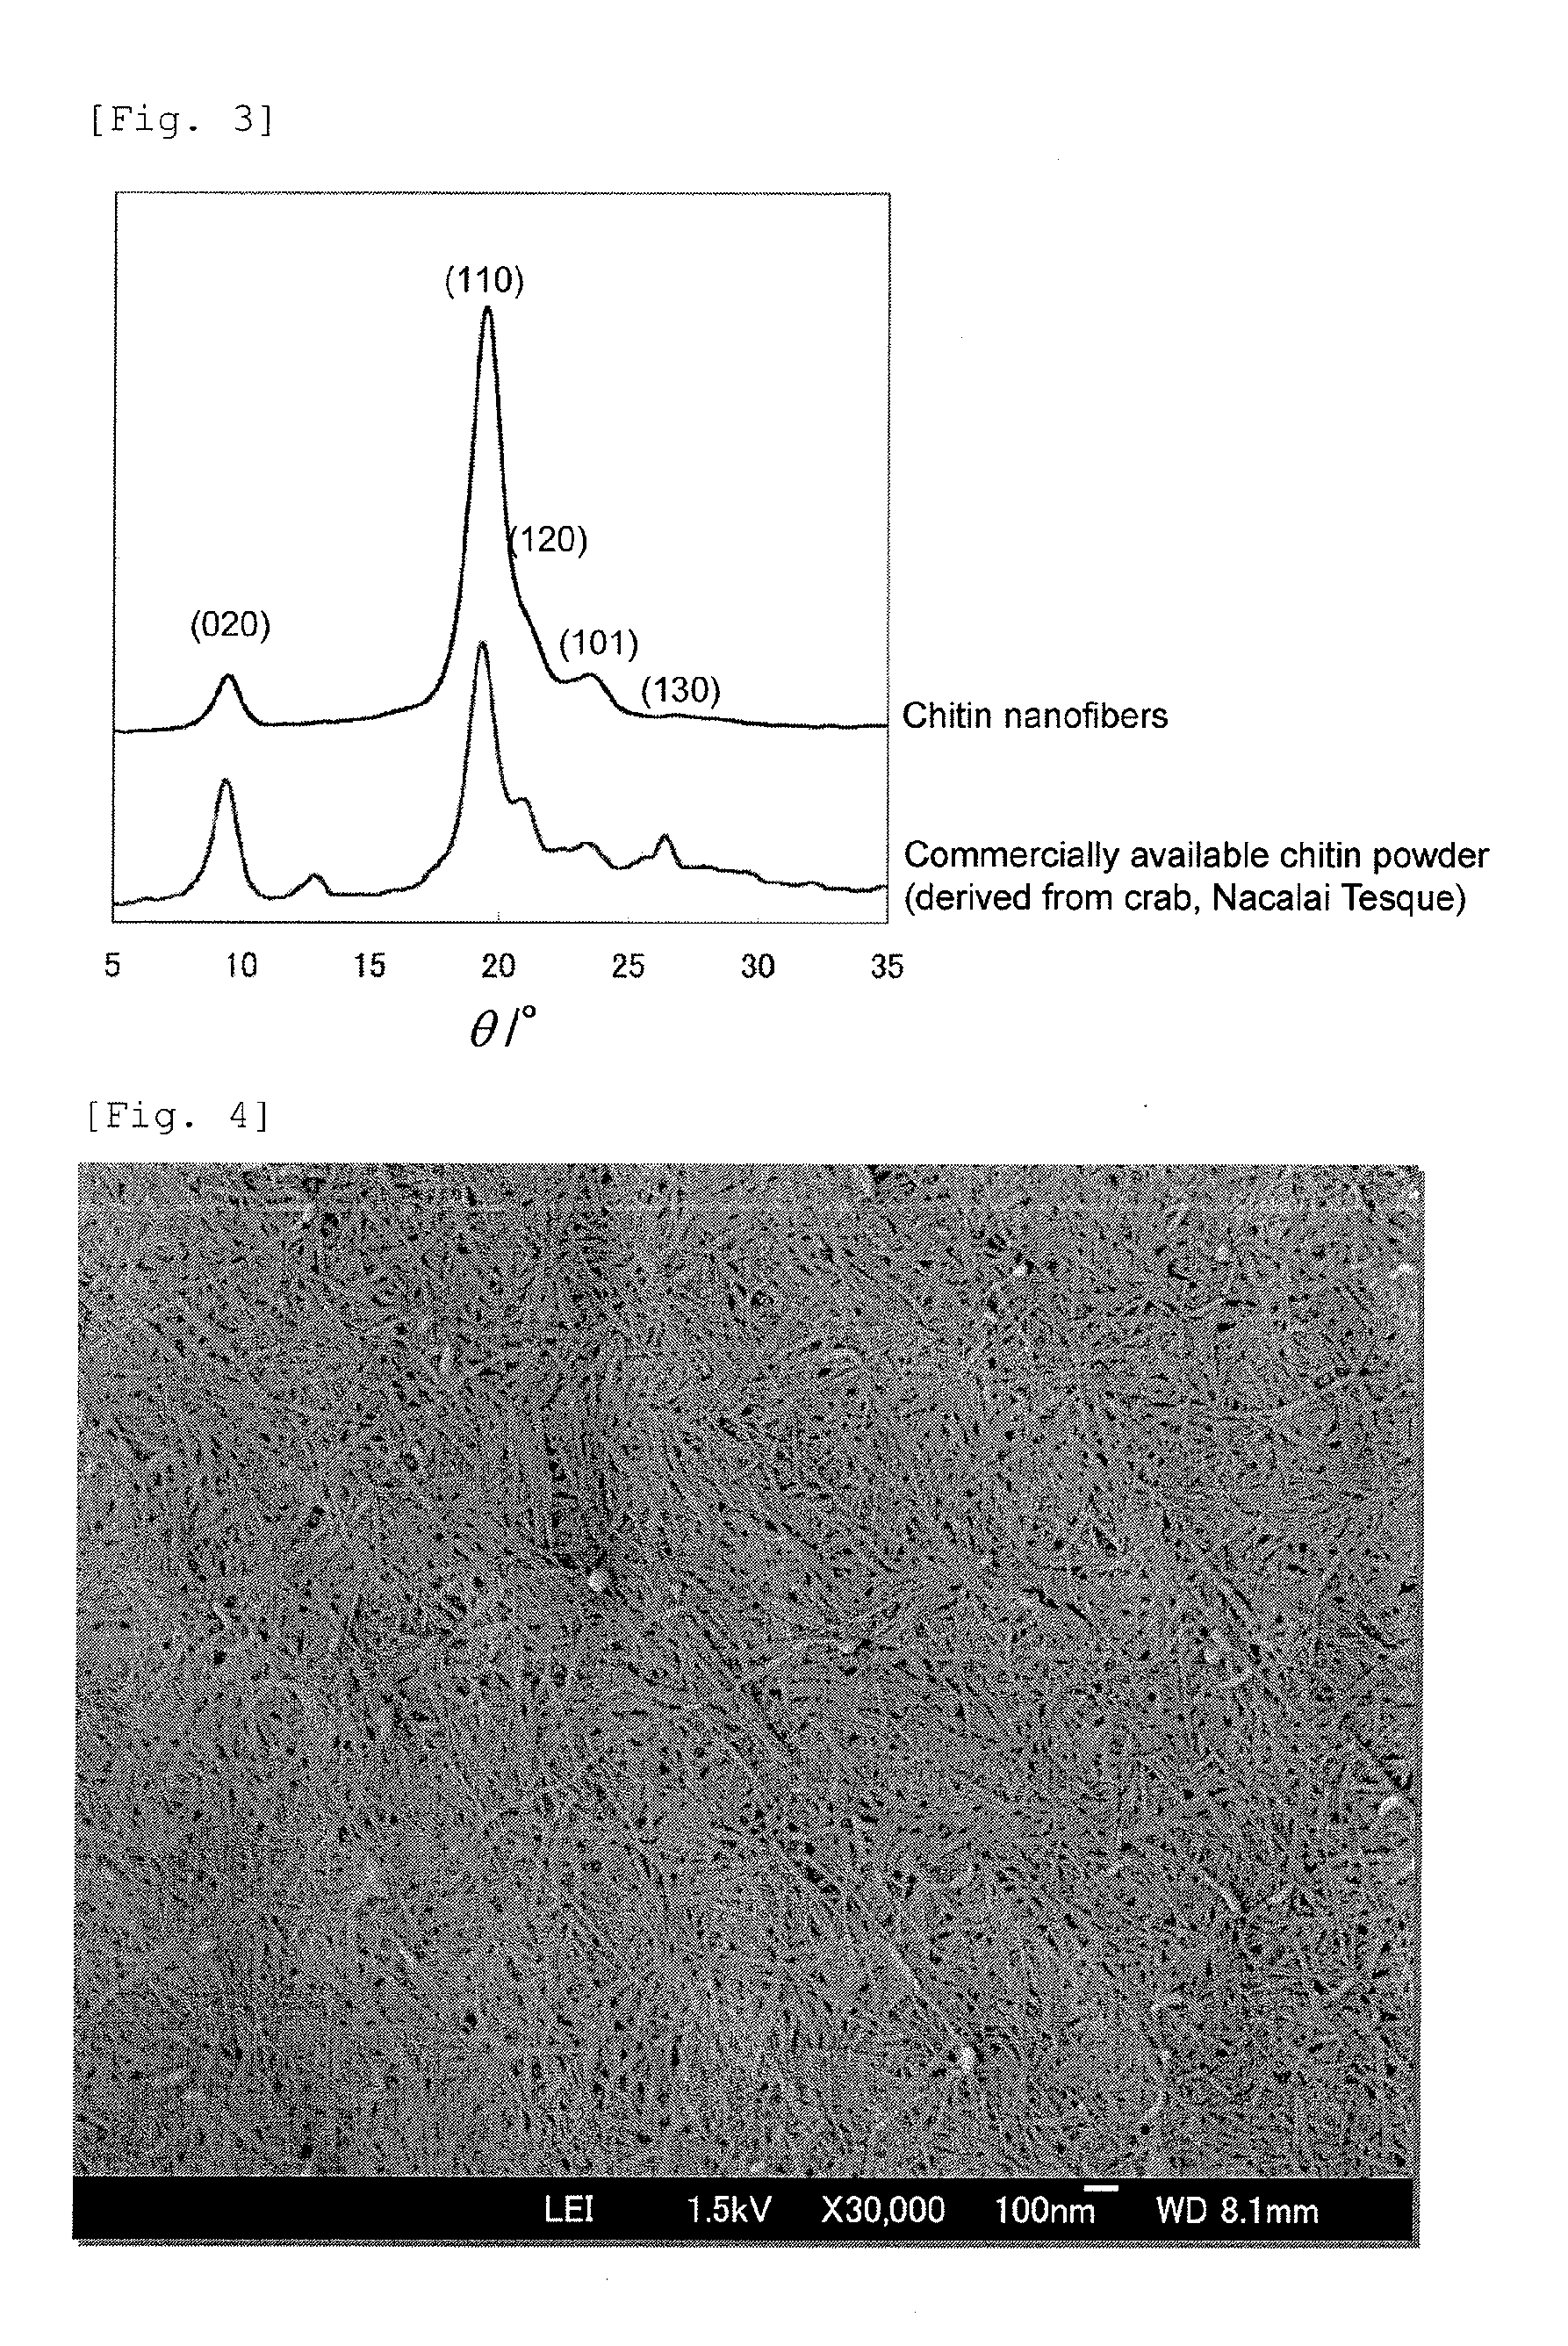 Method for producing chitin nanofibers, composite material and coating composition each containing chitin nanofibers, and method for producing chitosan nanofibers, composite material and coating composition each containing chitosan nanofibers